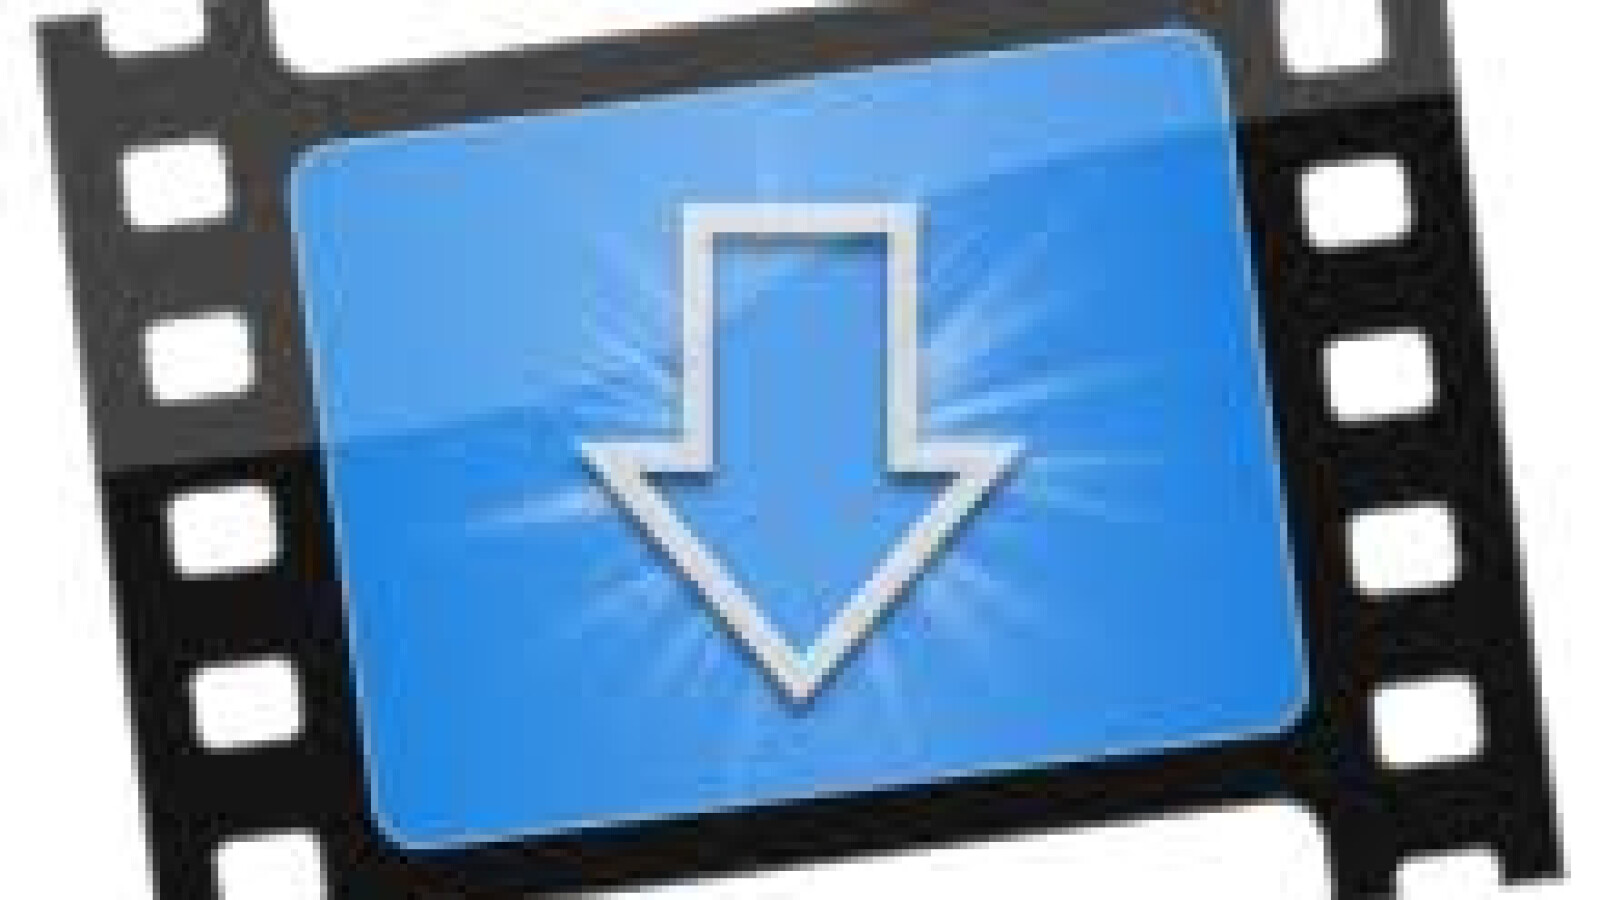 for apple download MediaHuman YouTube Downloader 3.9.9.83.2406